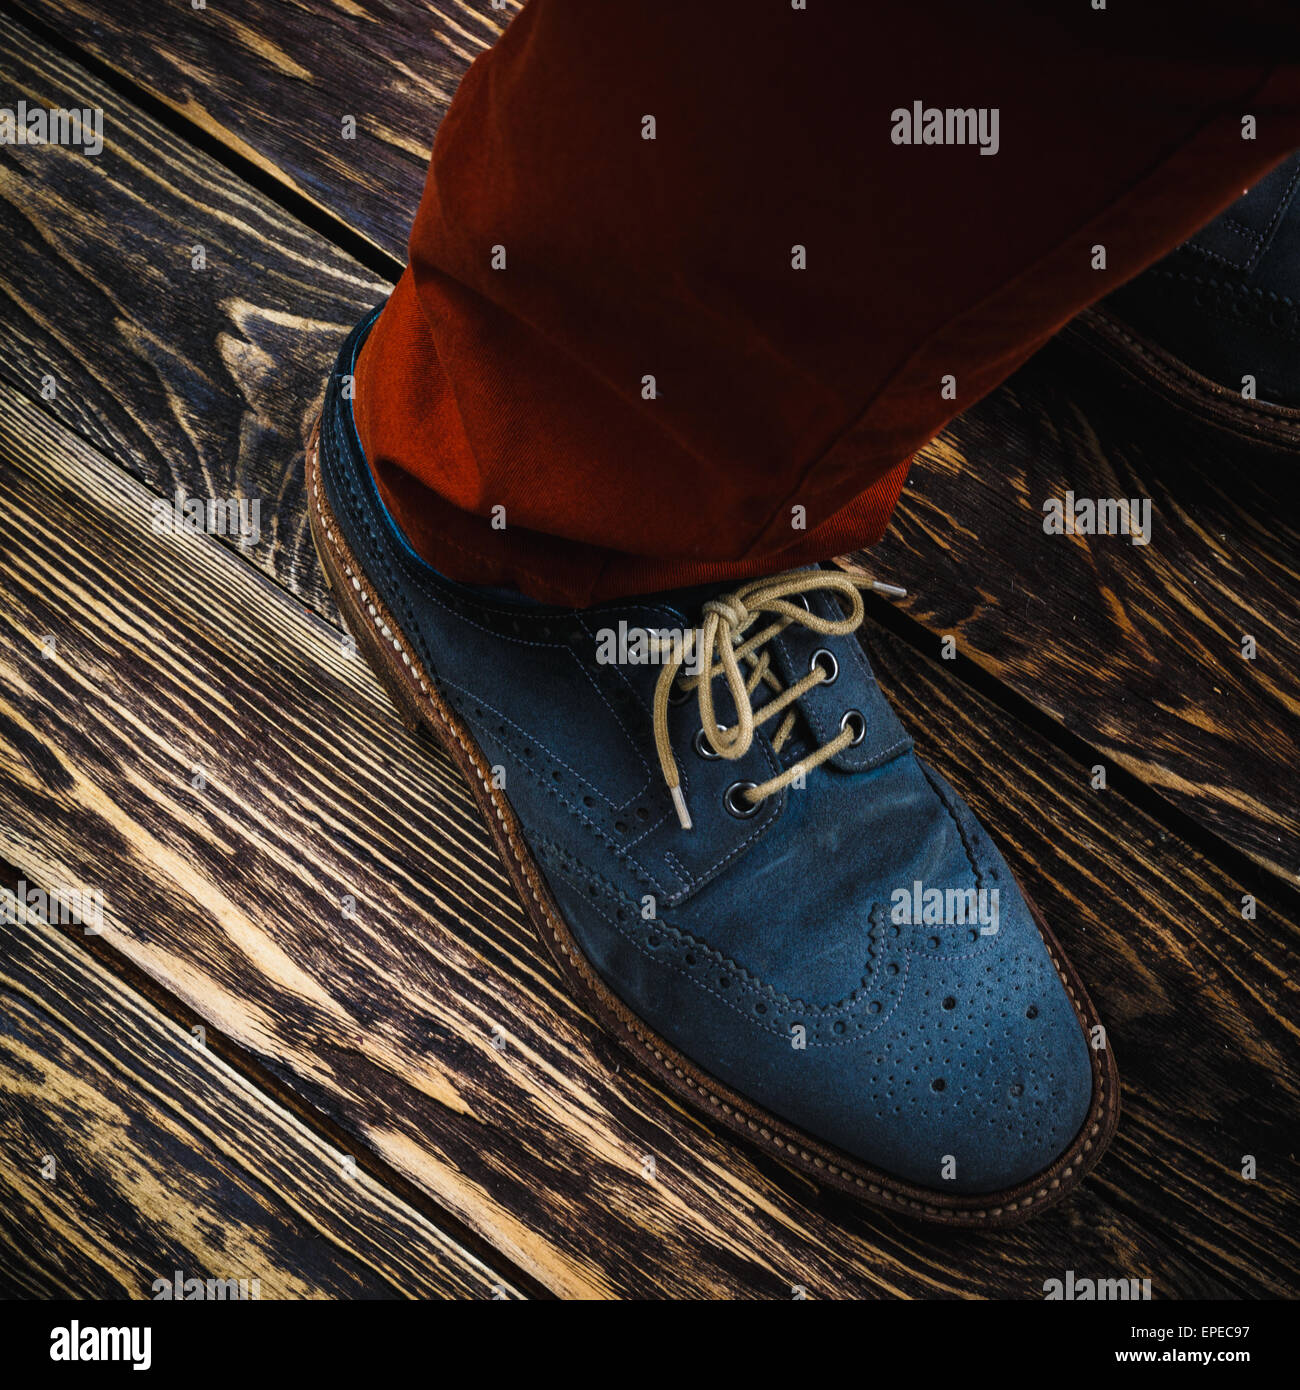 Close up of men's brogues (also known as derbies,gibsons or wingtips) made from blue oiled suede. Stock Photo